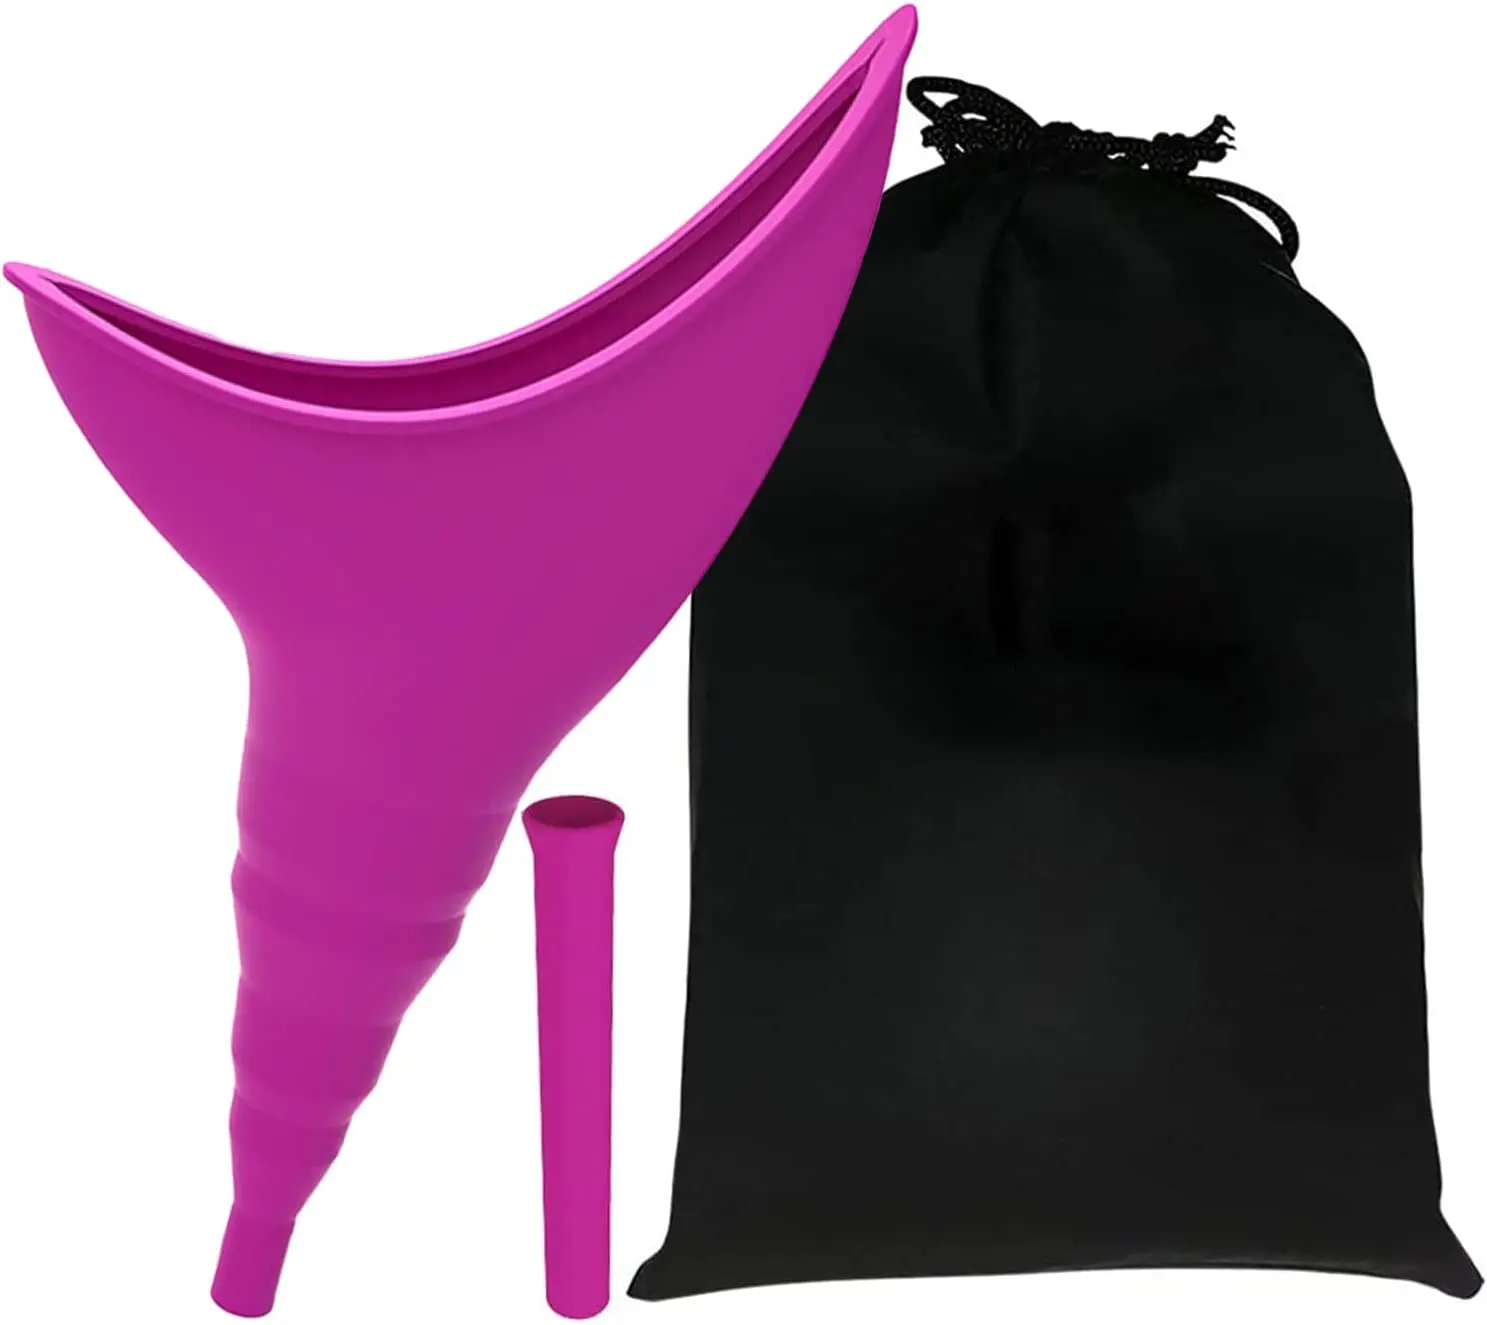 Female Urination Device, Reusable Silicone Female Urinal, Portable Urinal Allows Women to Pee Standing Up